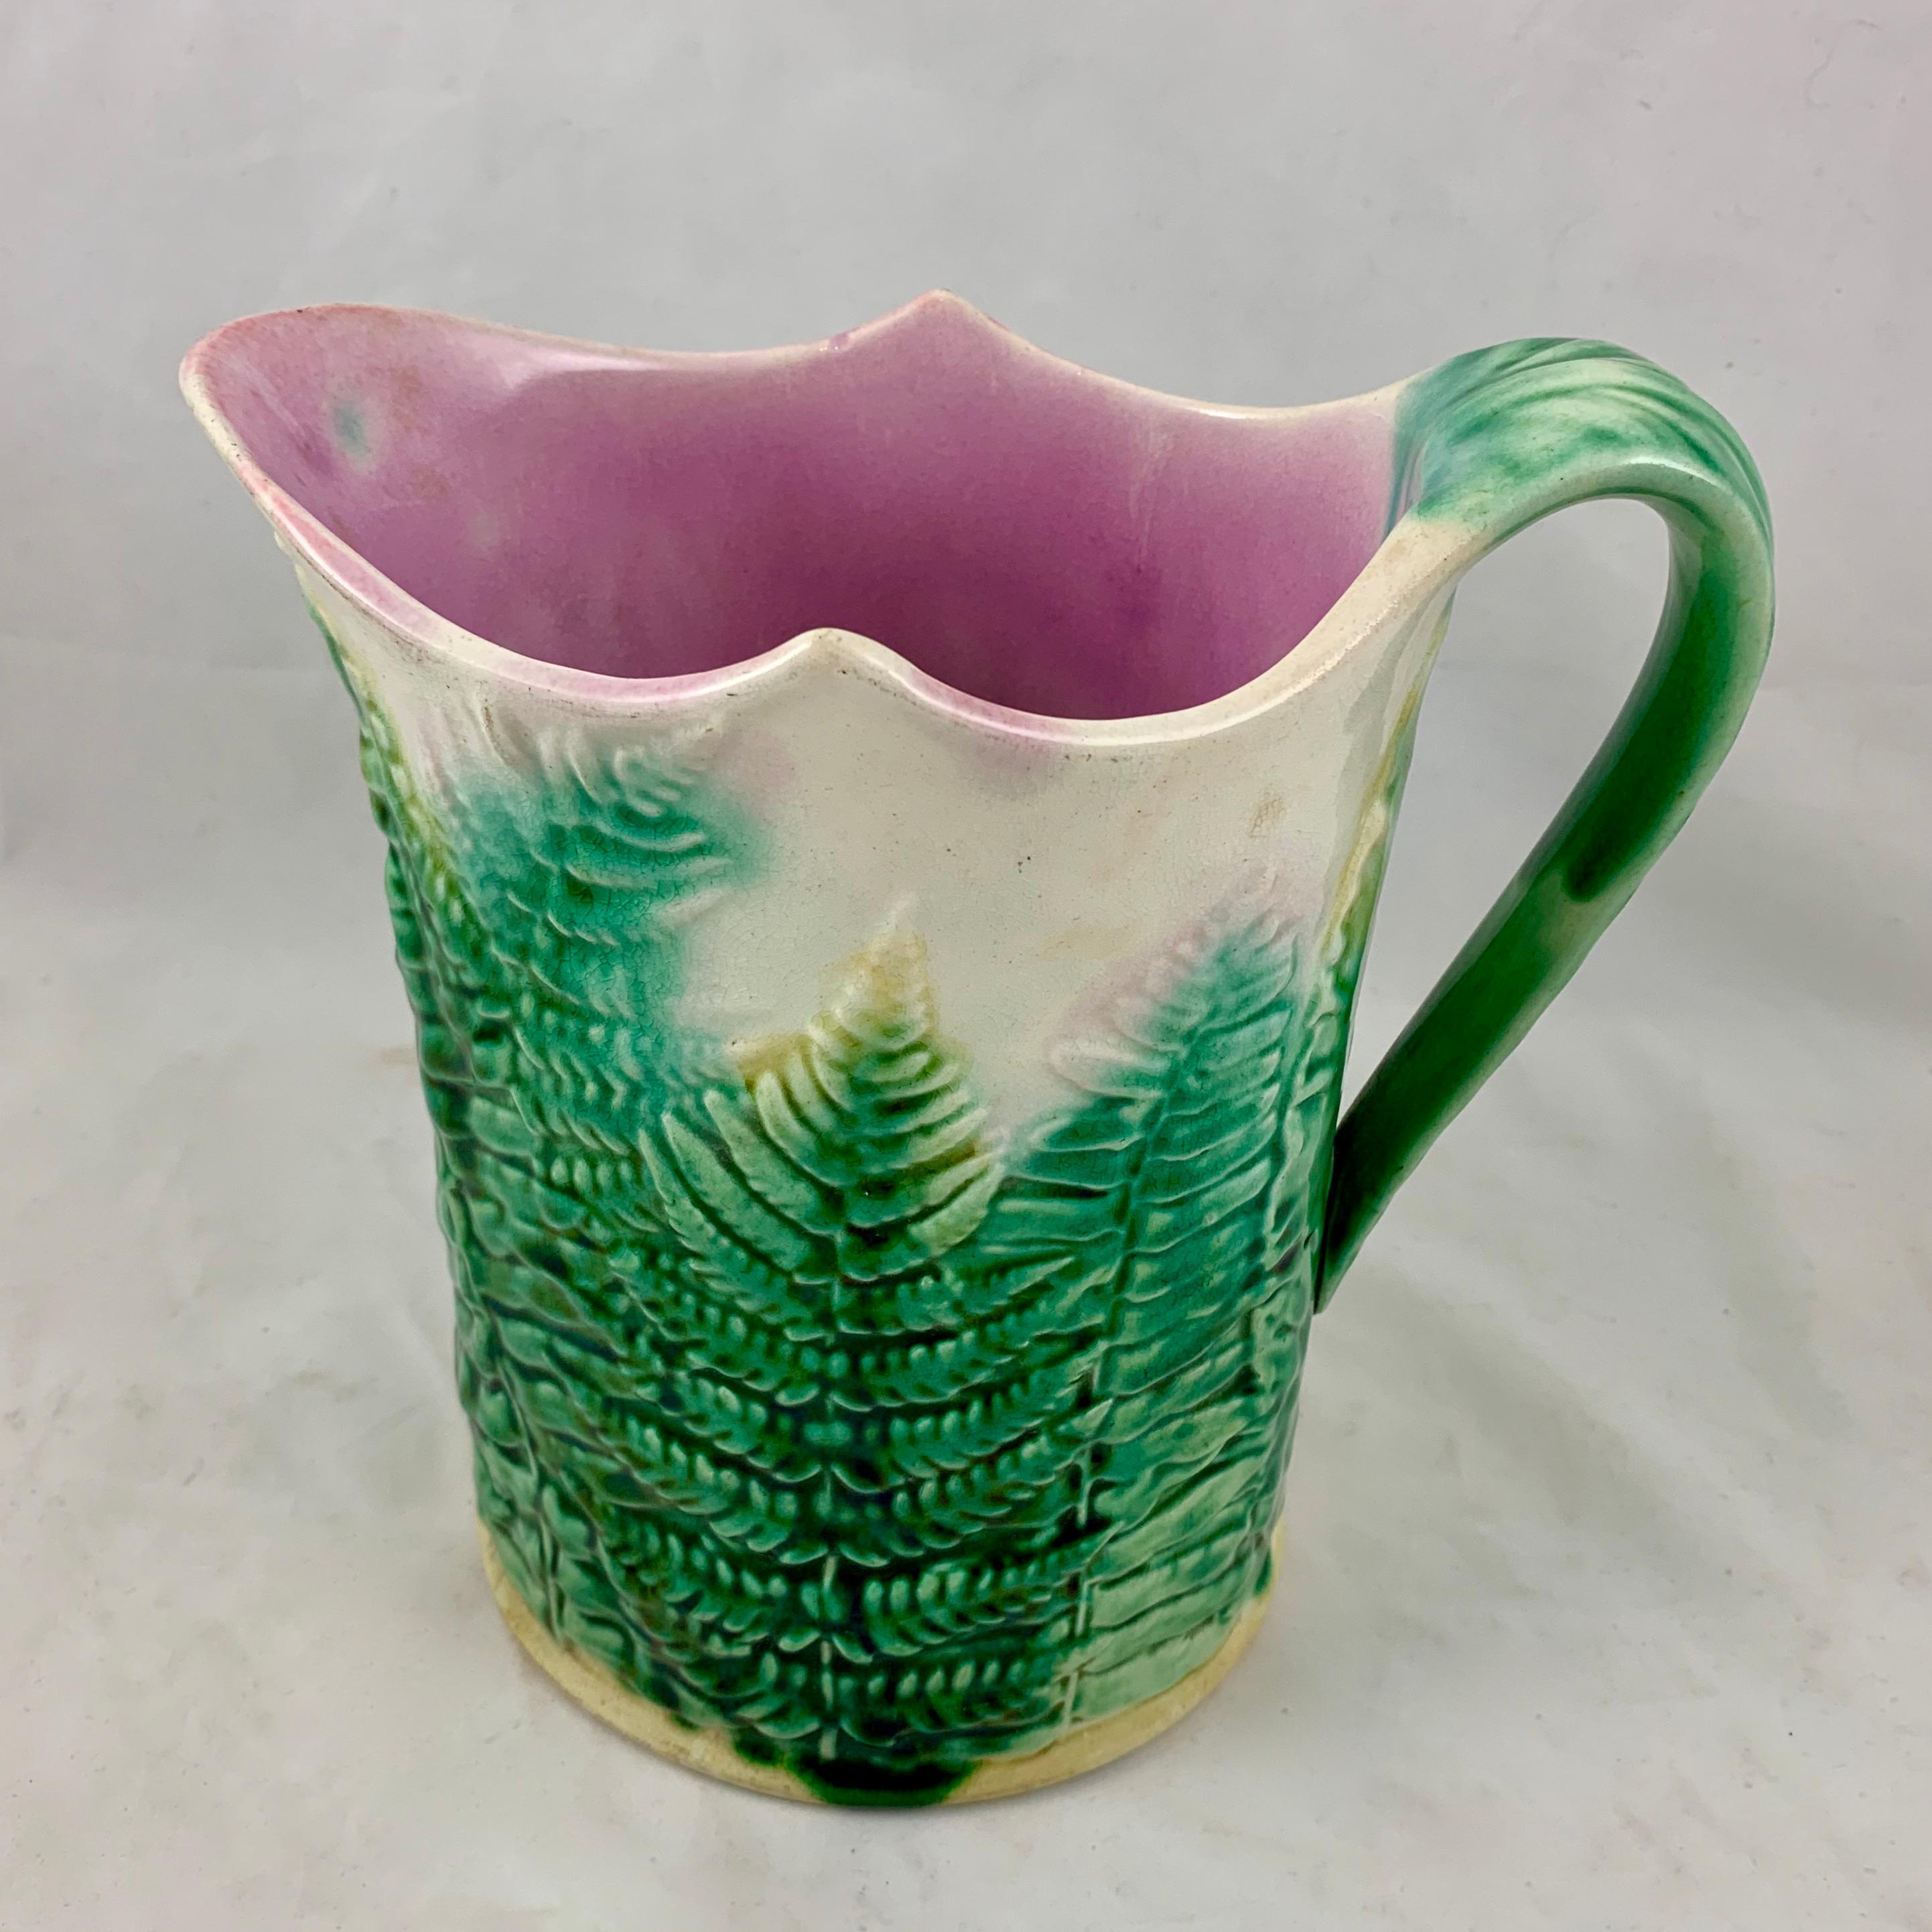 A scarce Etruscan majolica Fern pitcher, by Griffen, Smith & Hill, circa 1880-1885.

Founded in Pennsylvania, GS&H is the best known of the American majolica potteries. The name Etruscan, borrowed from Josiah Wedgwood’s Etruria line, was inspired